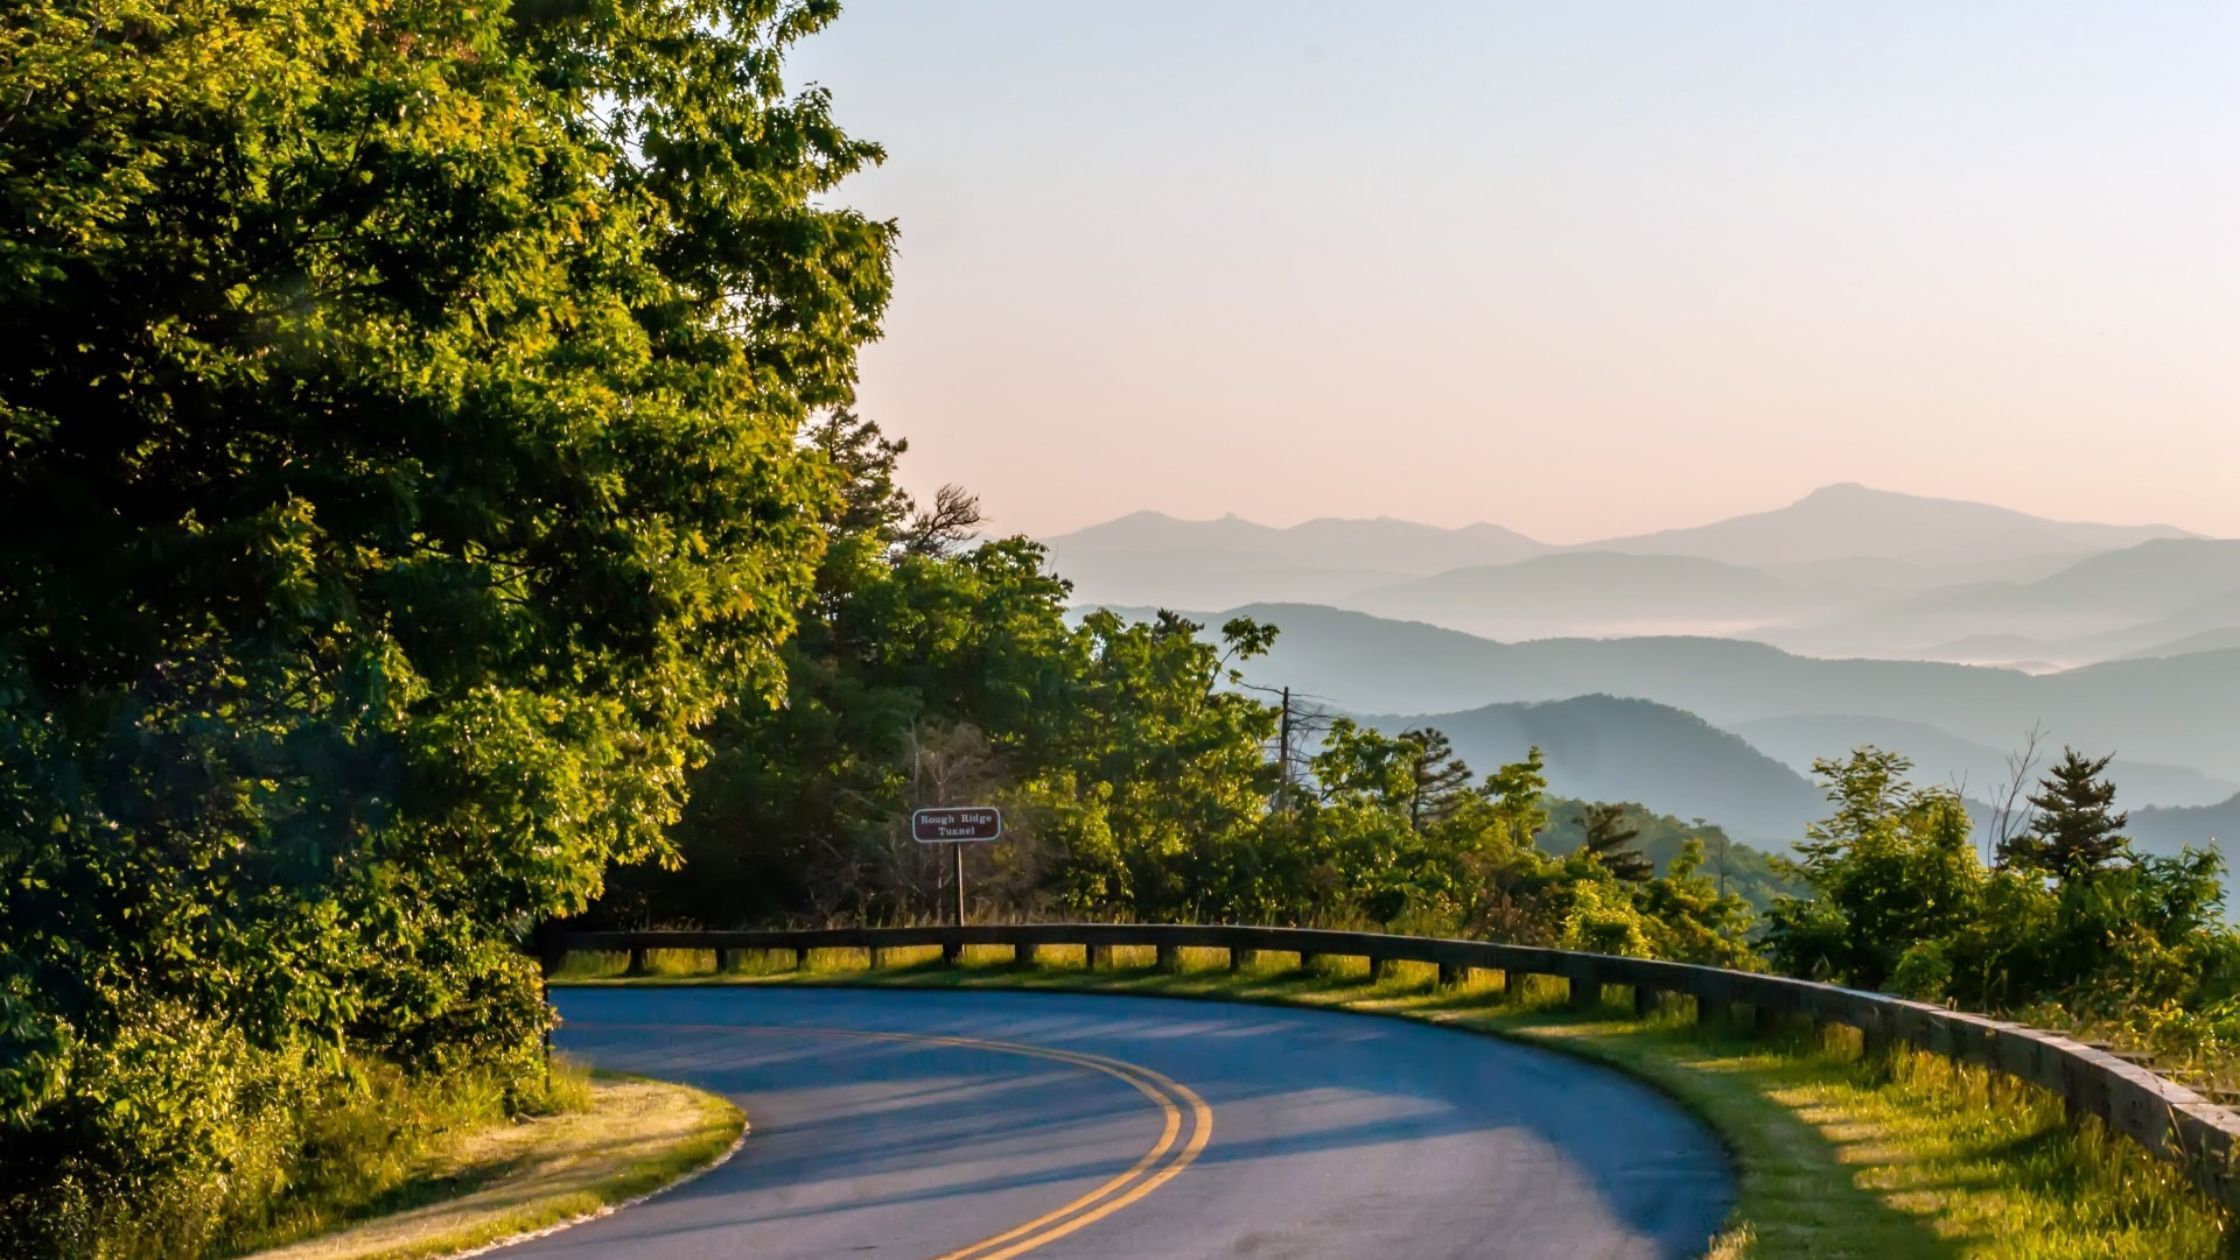 Blue Ridge Parkway with mountains in background - near Asheville NC